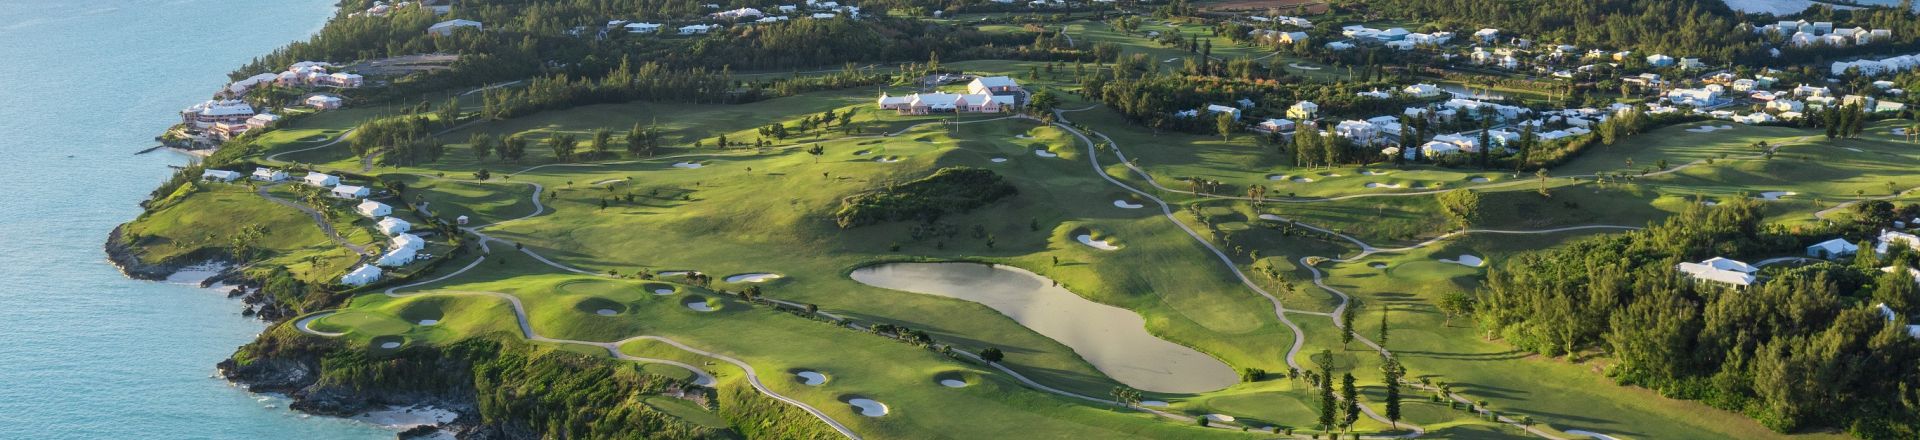 Experience golfing paradise at Port Royal Golf Club in Bermuda – stunning ocean views, lush greens, and a world-class course await on your unforgettable Bermuda golf holiday.